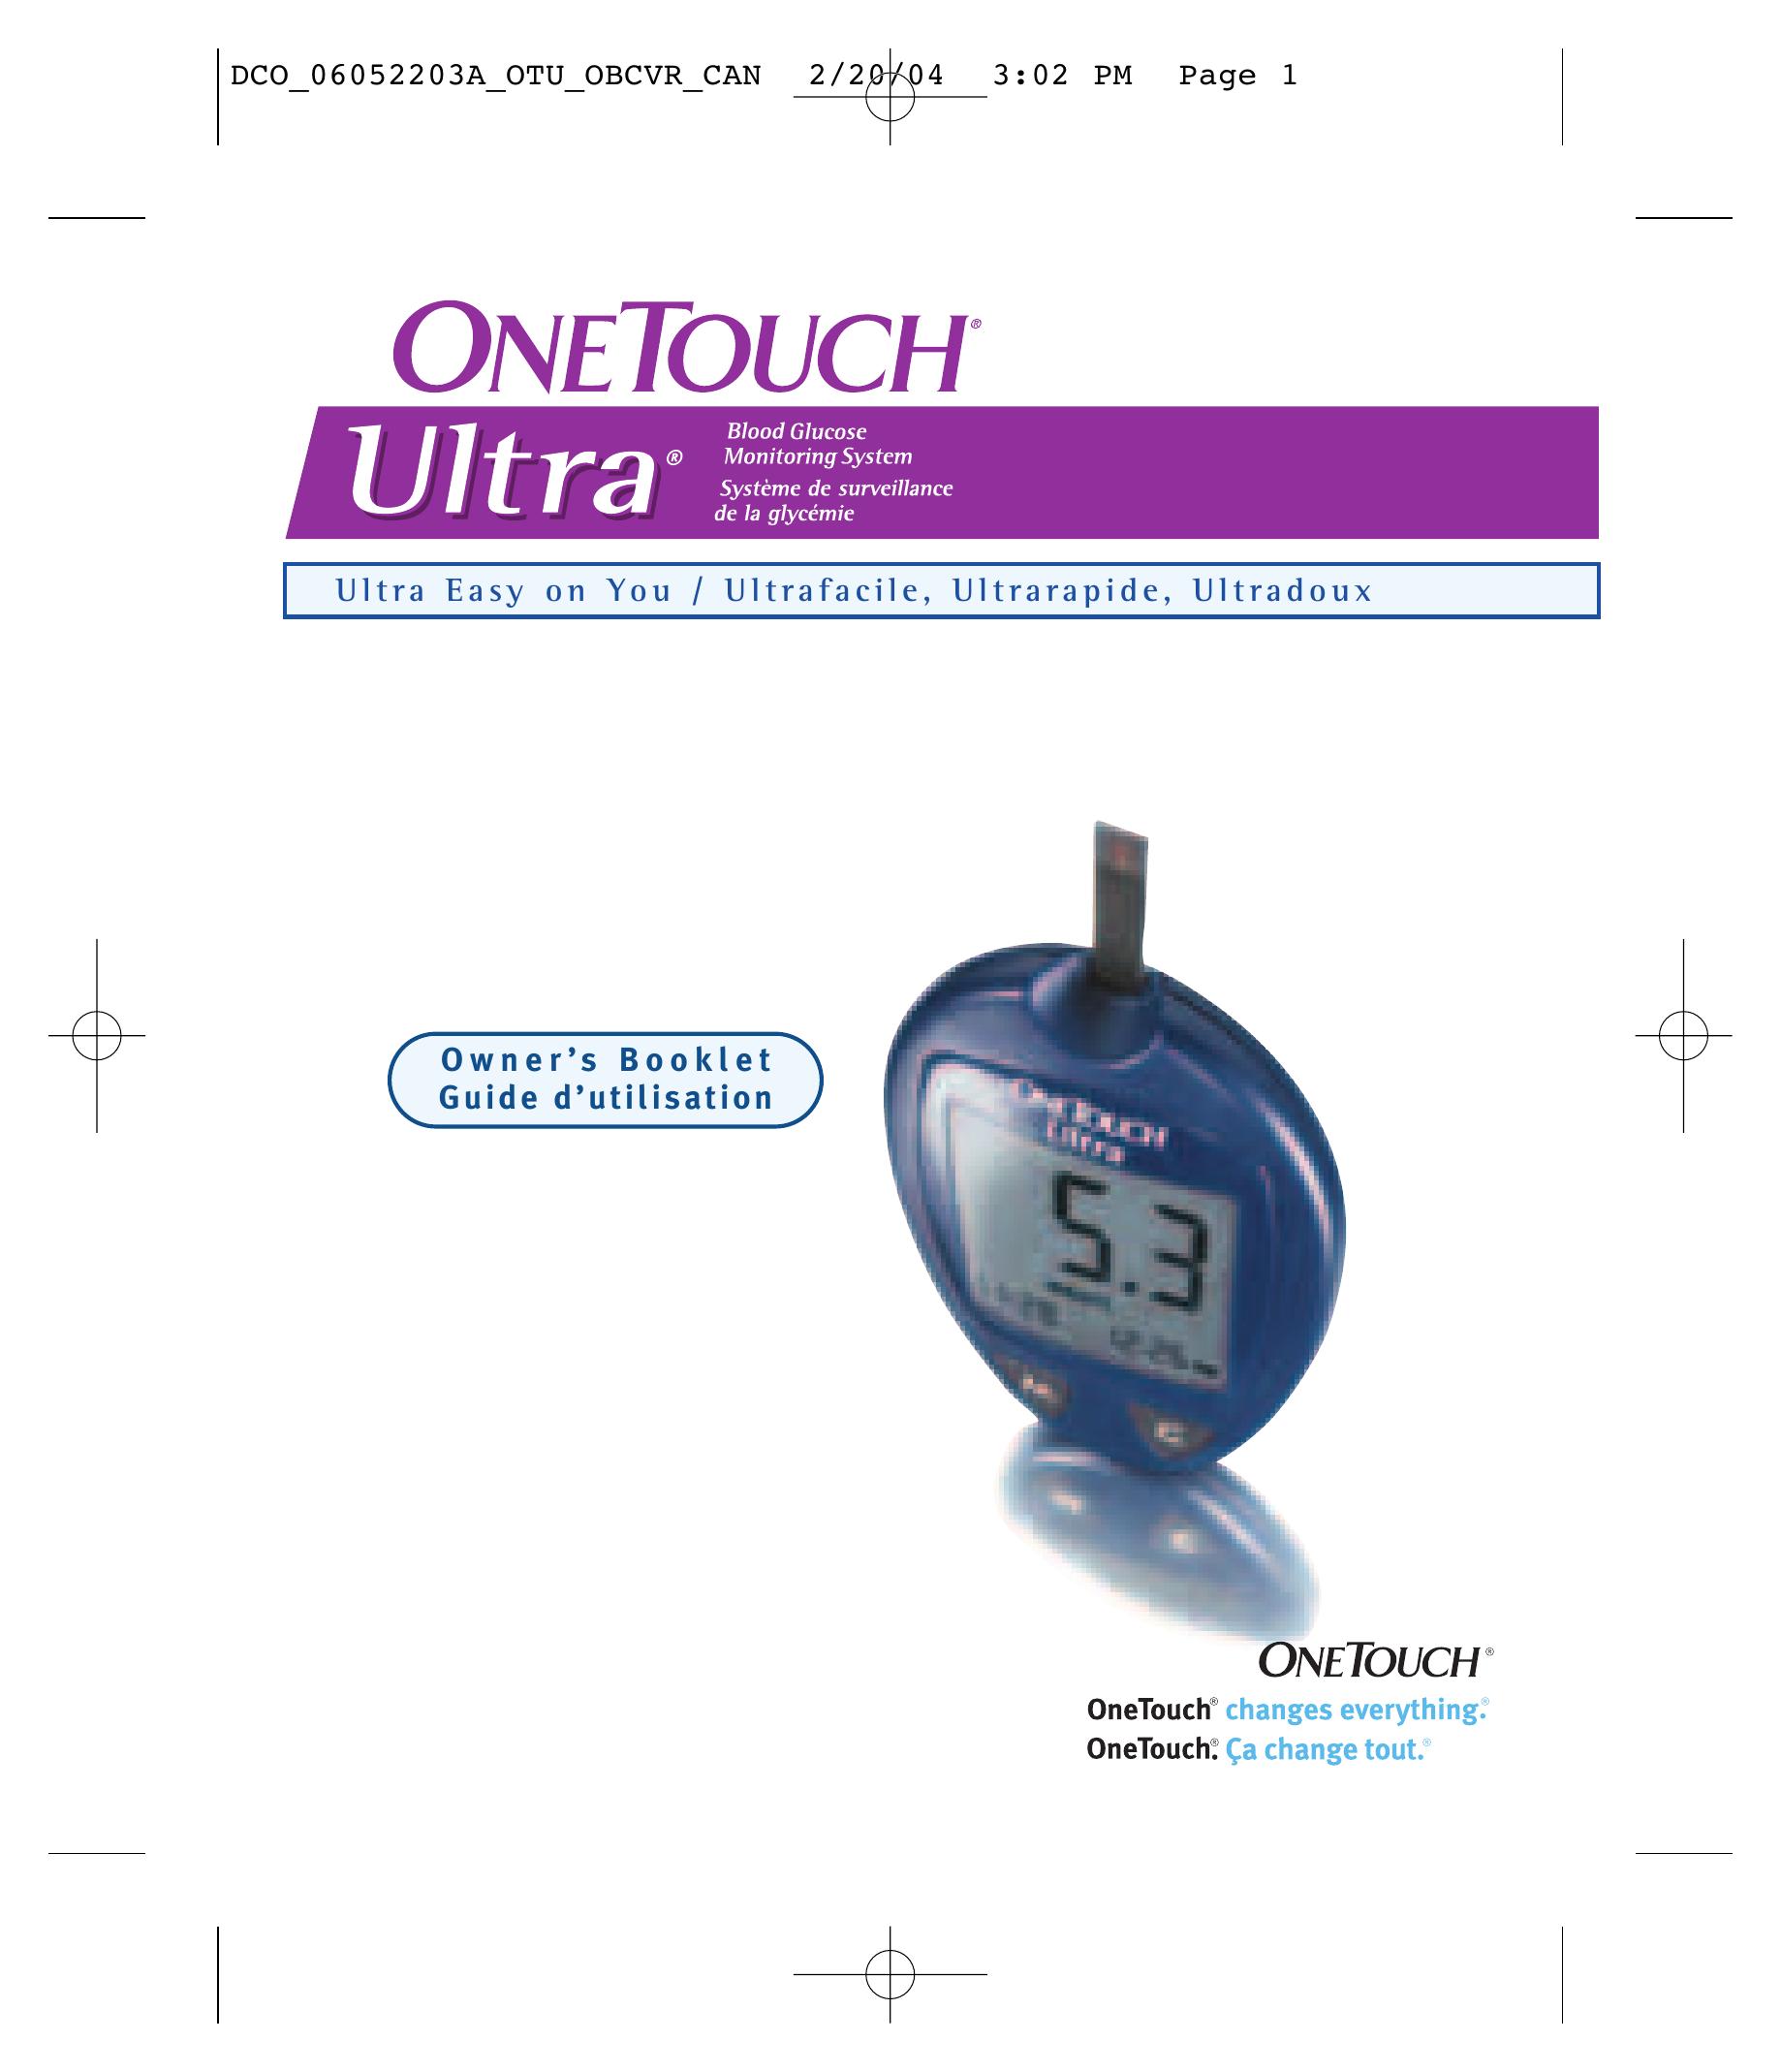 Lifescan OneTouch Ultra Blood Glucose Meter User Manual